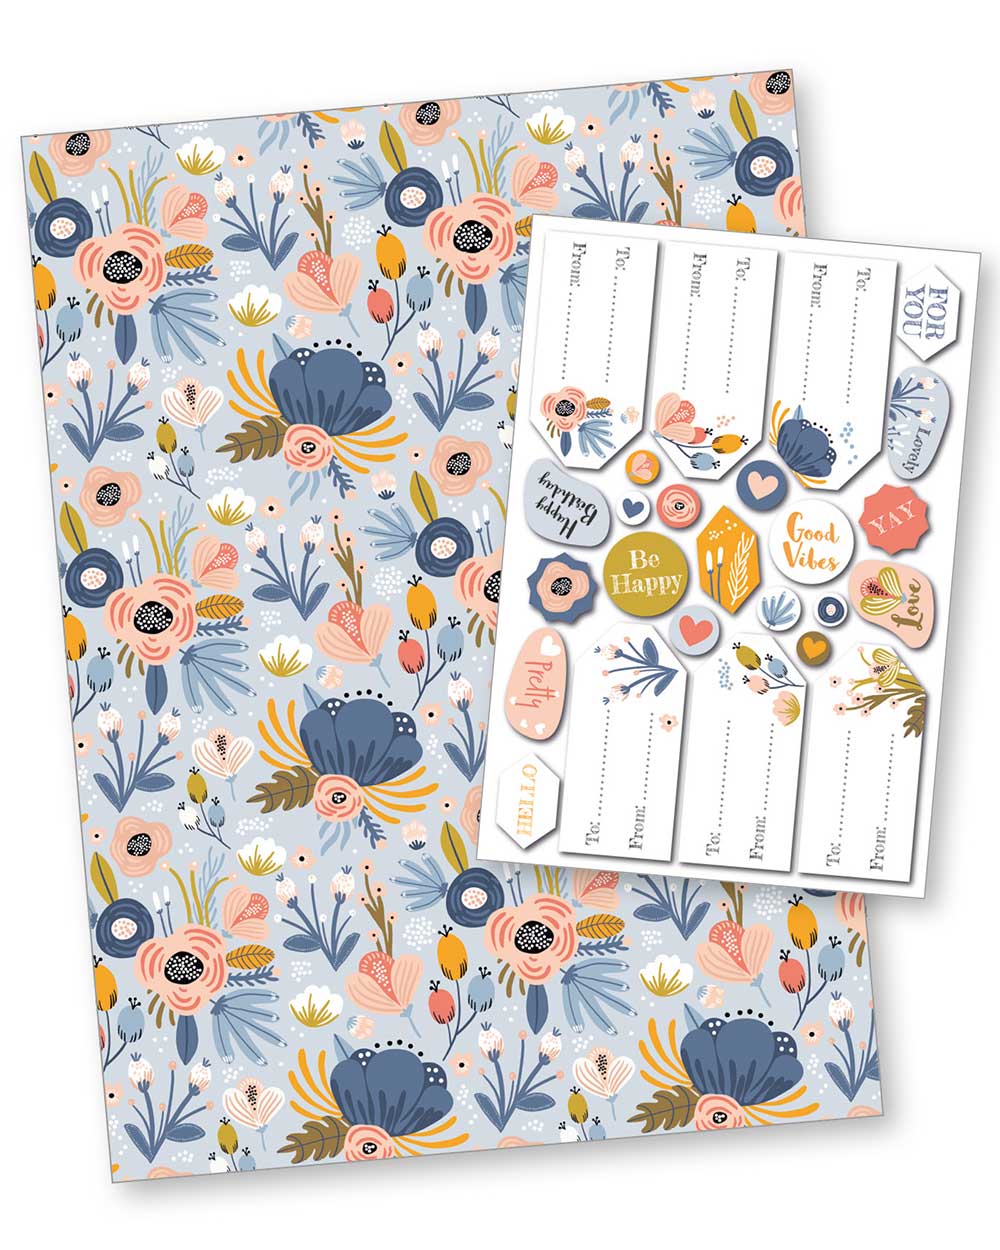 What the set includes. Pretty floral wrap with sticker tags